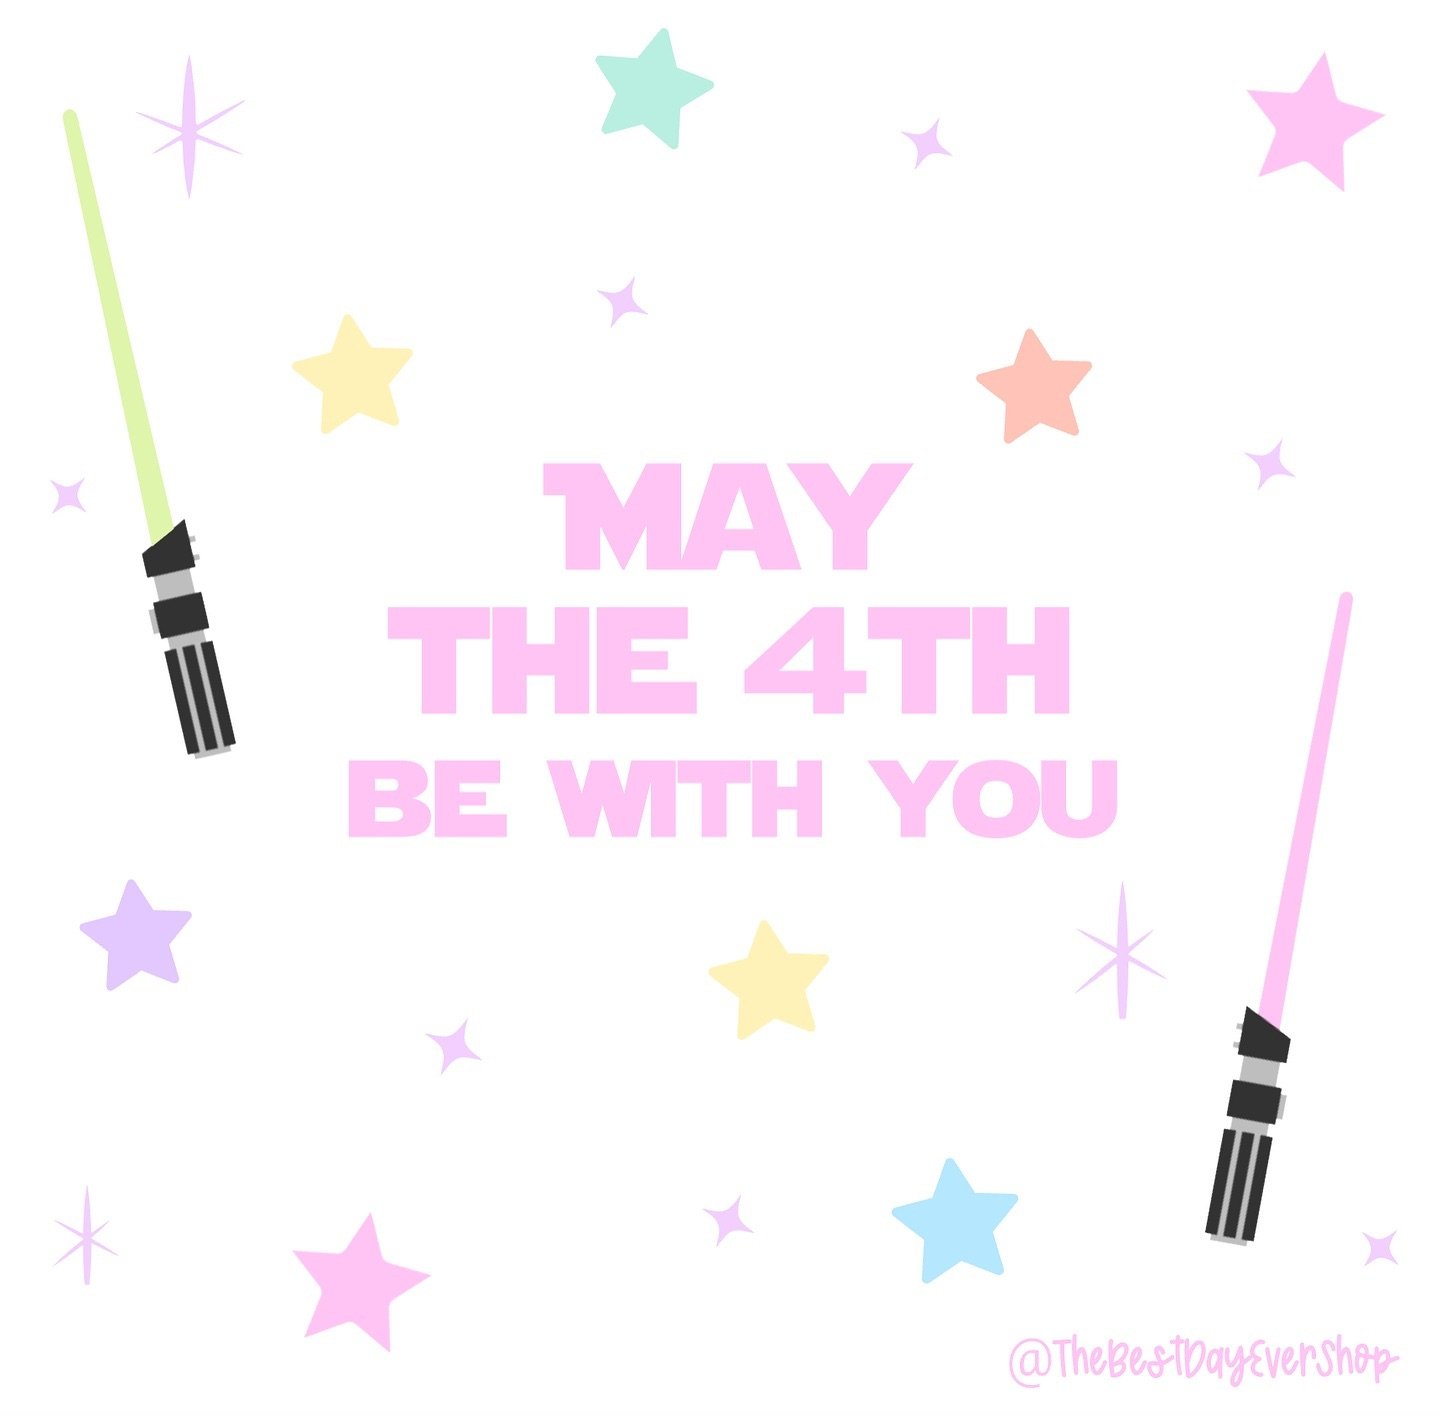 Happy Star Wars Day! May the 4th! Today is the last day to shop our Star Wars fanny pack and crew sweatshirts.